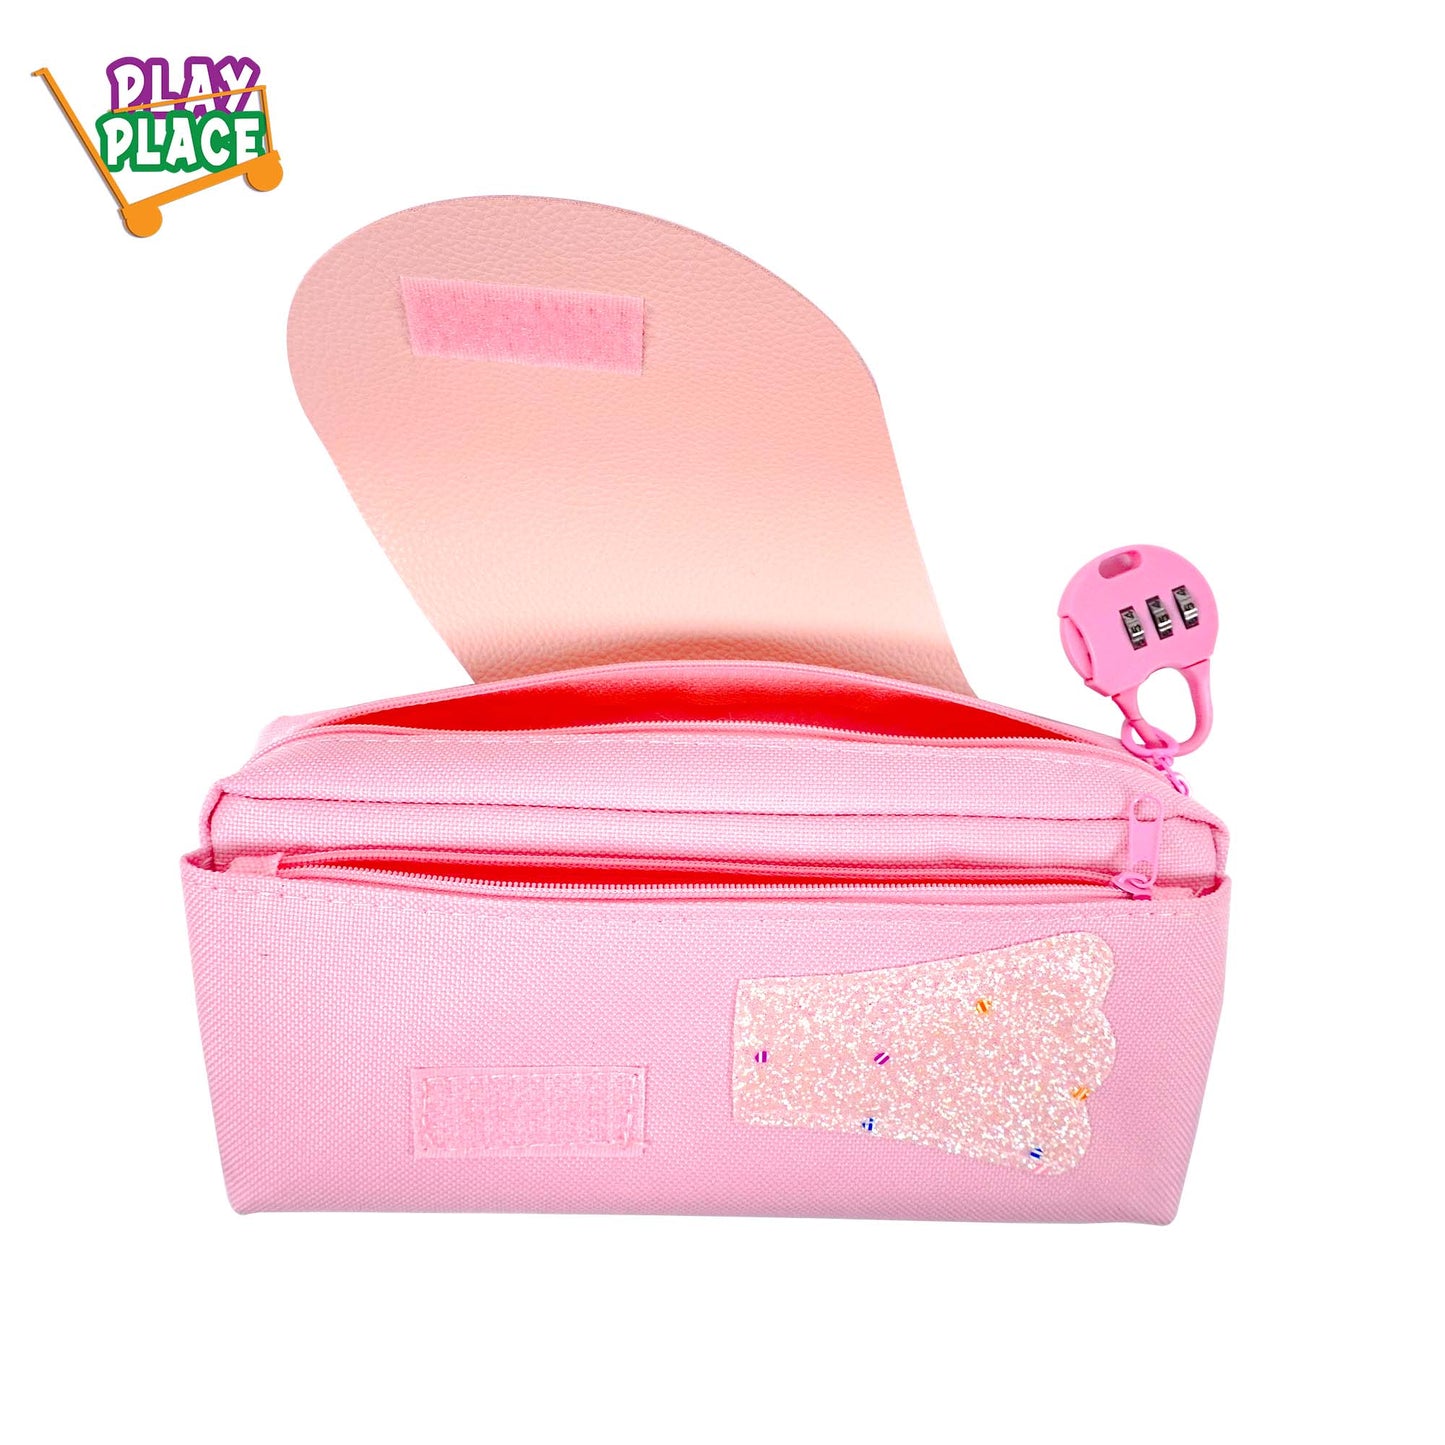 Stationery Pouch For Girls, 3 Zipper Lock Pencil Case